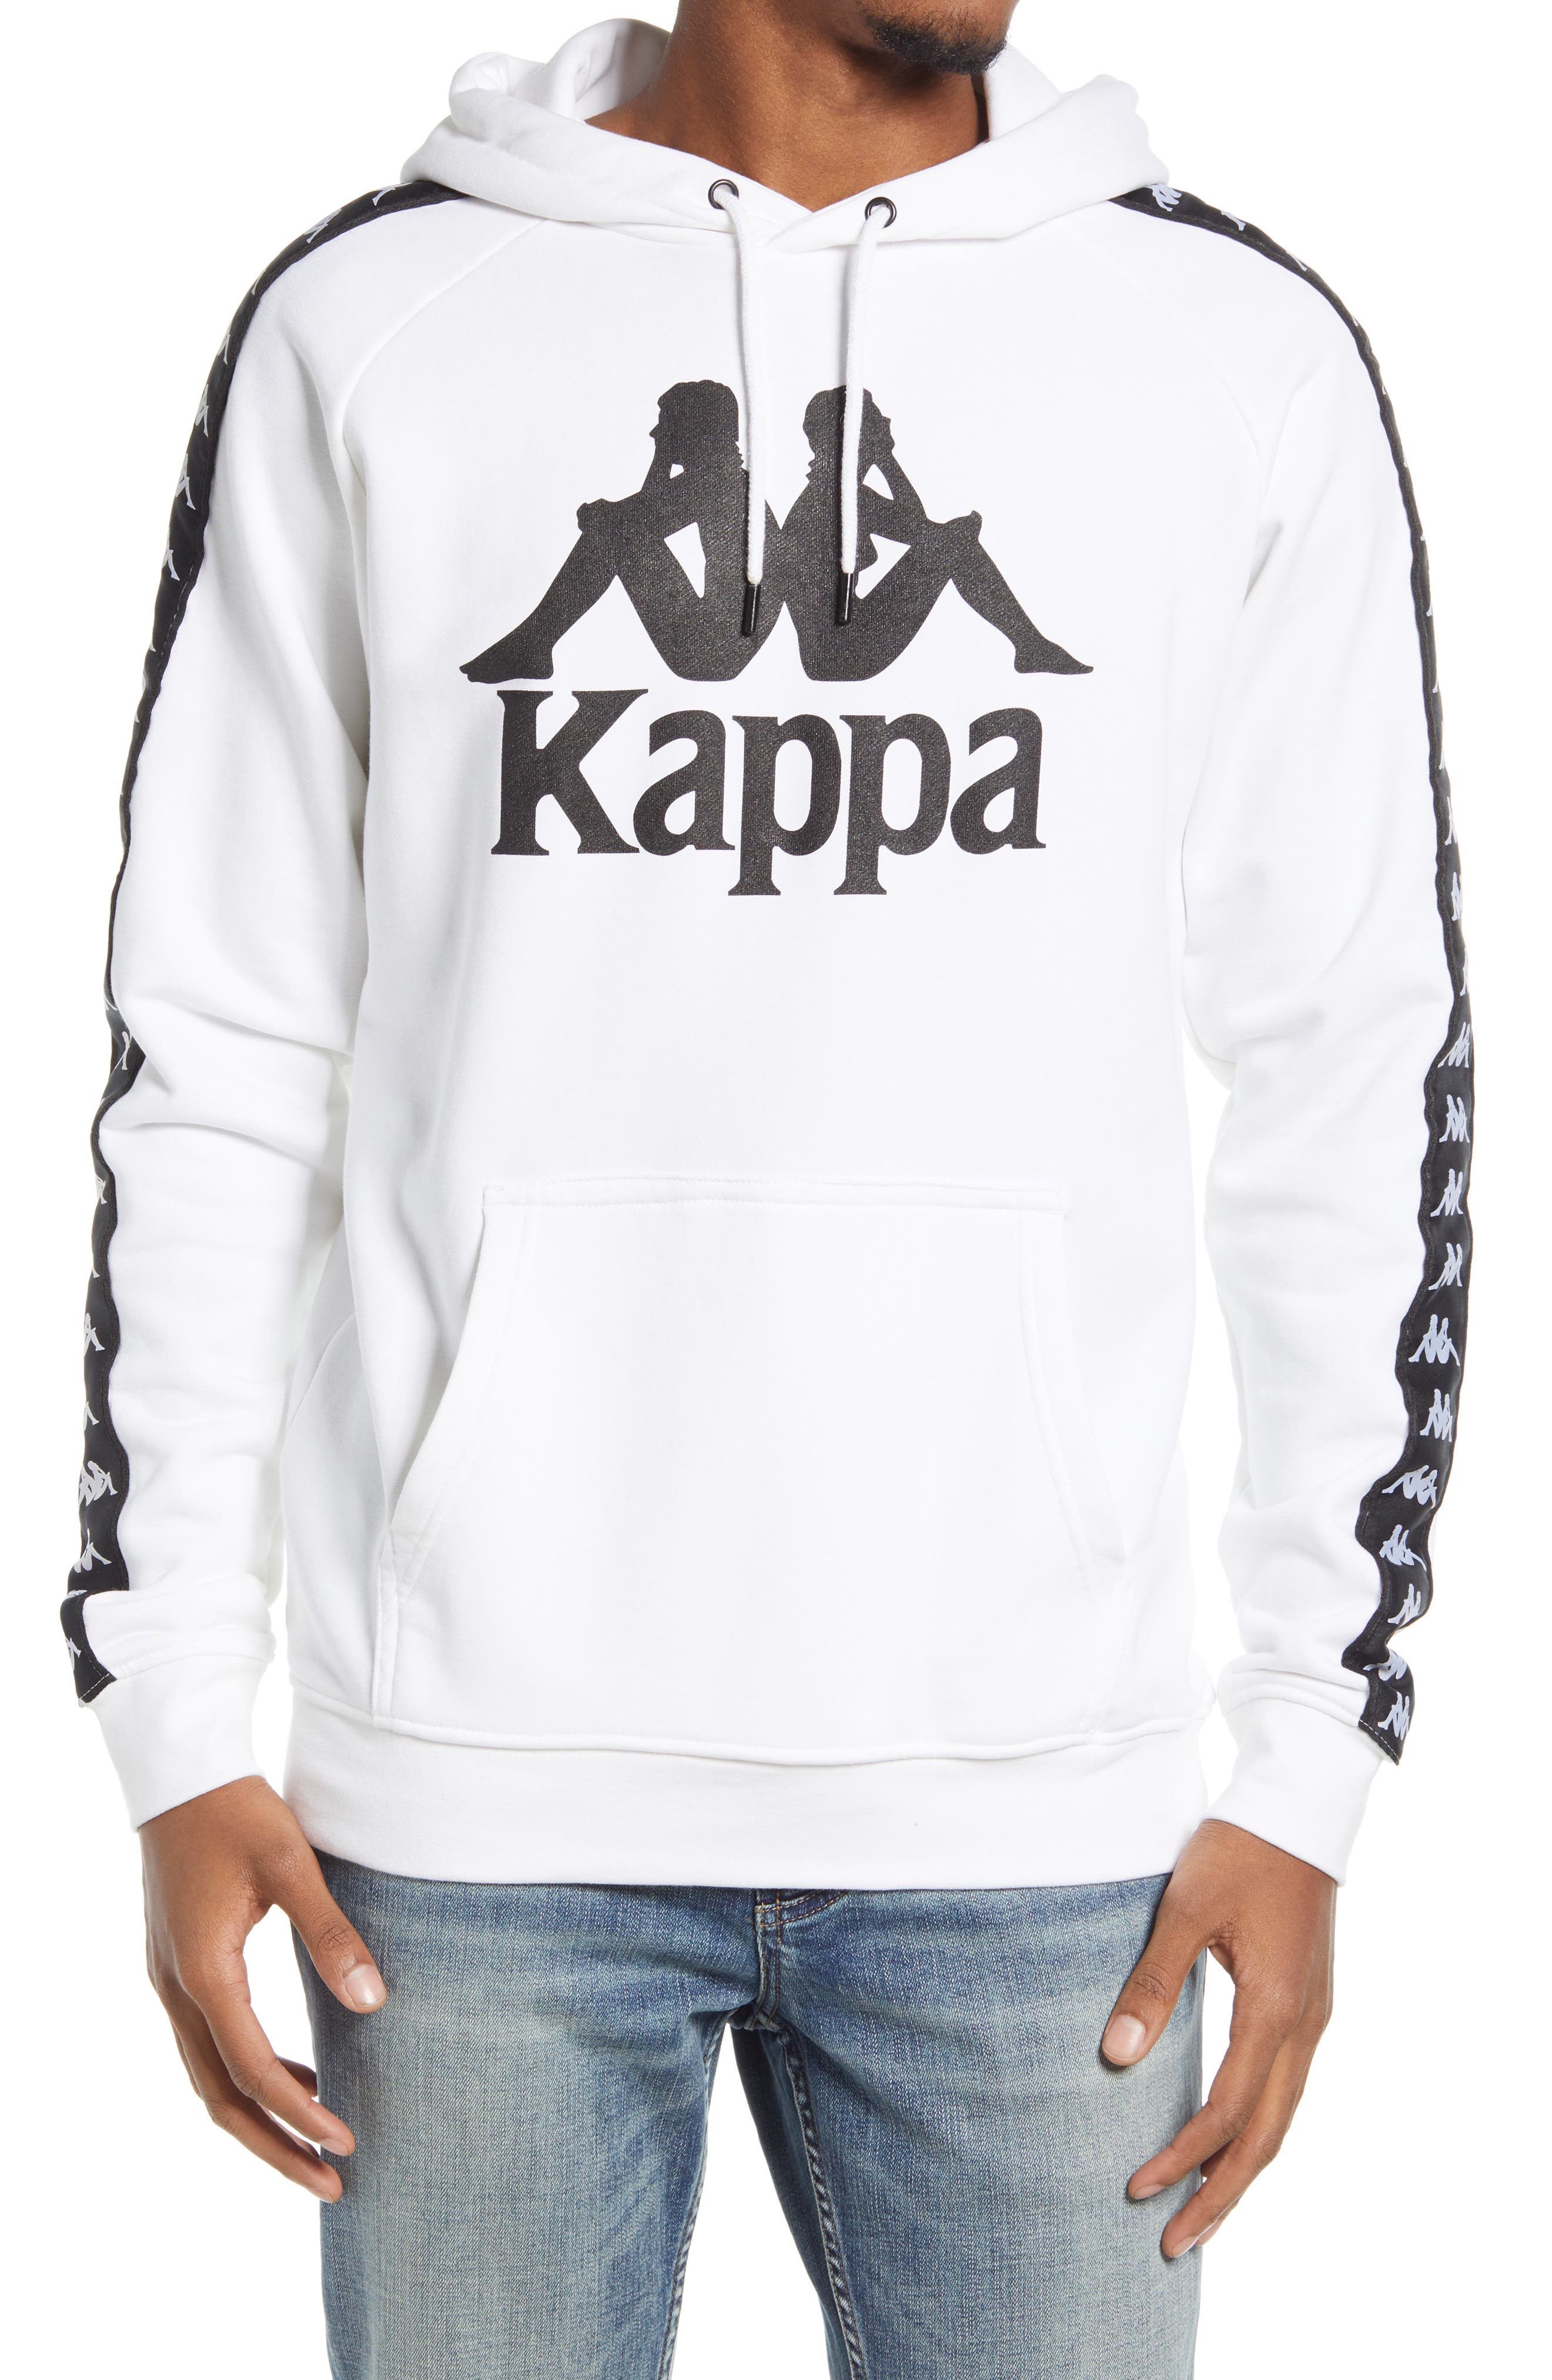 Kappa Clothing Online UP 62% OFF